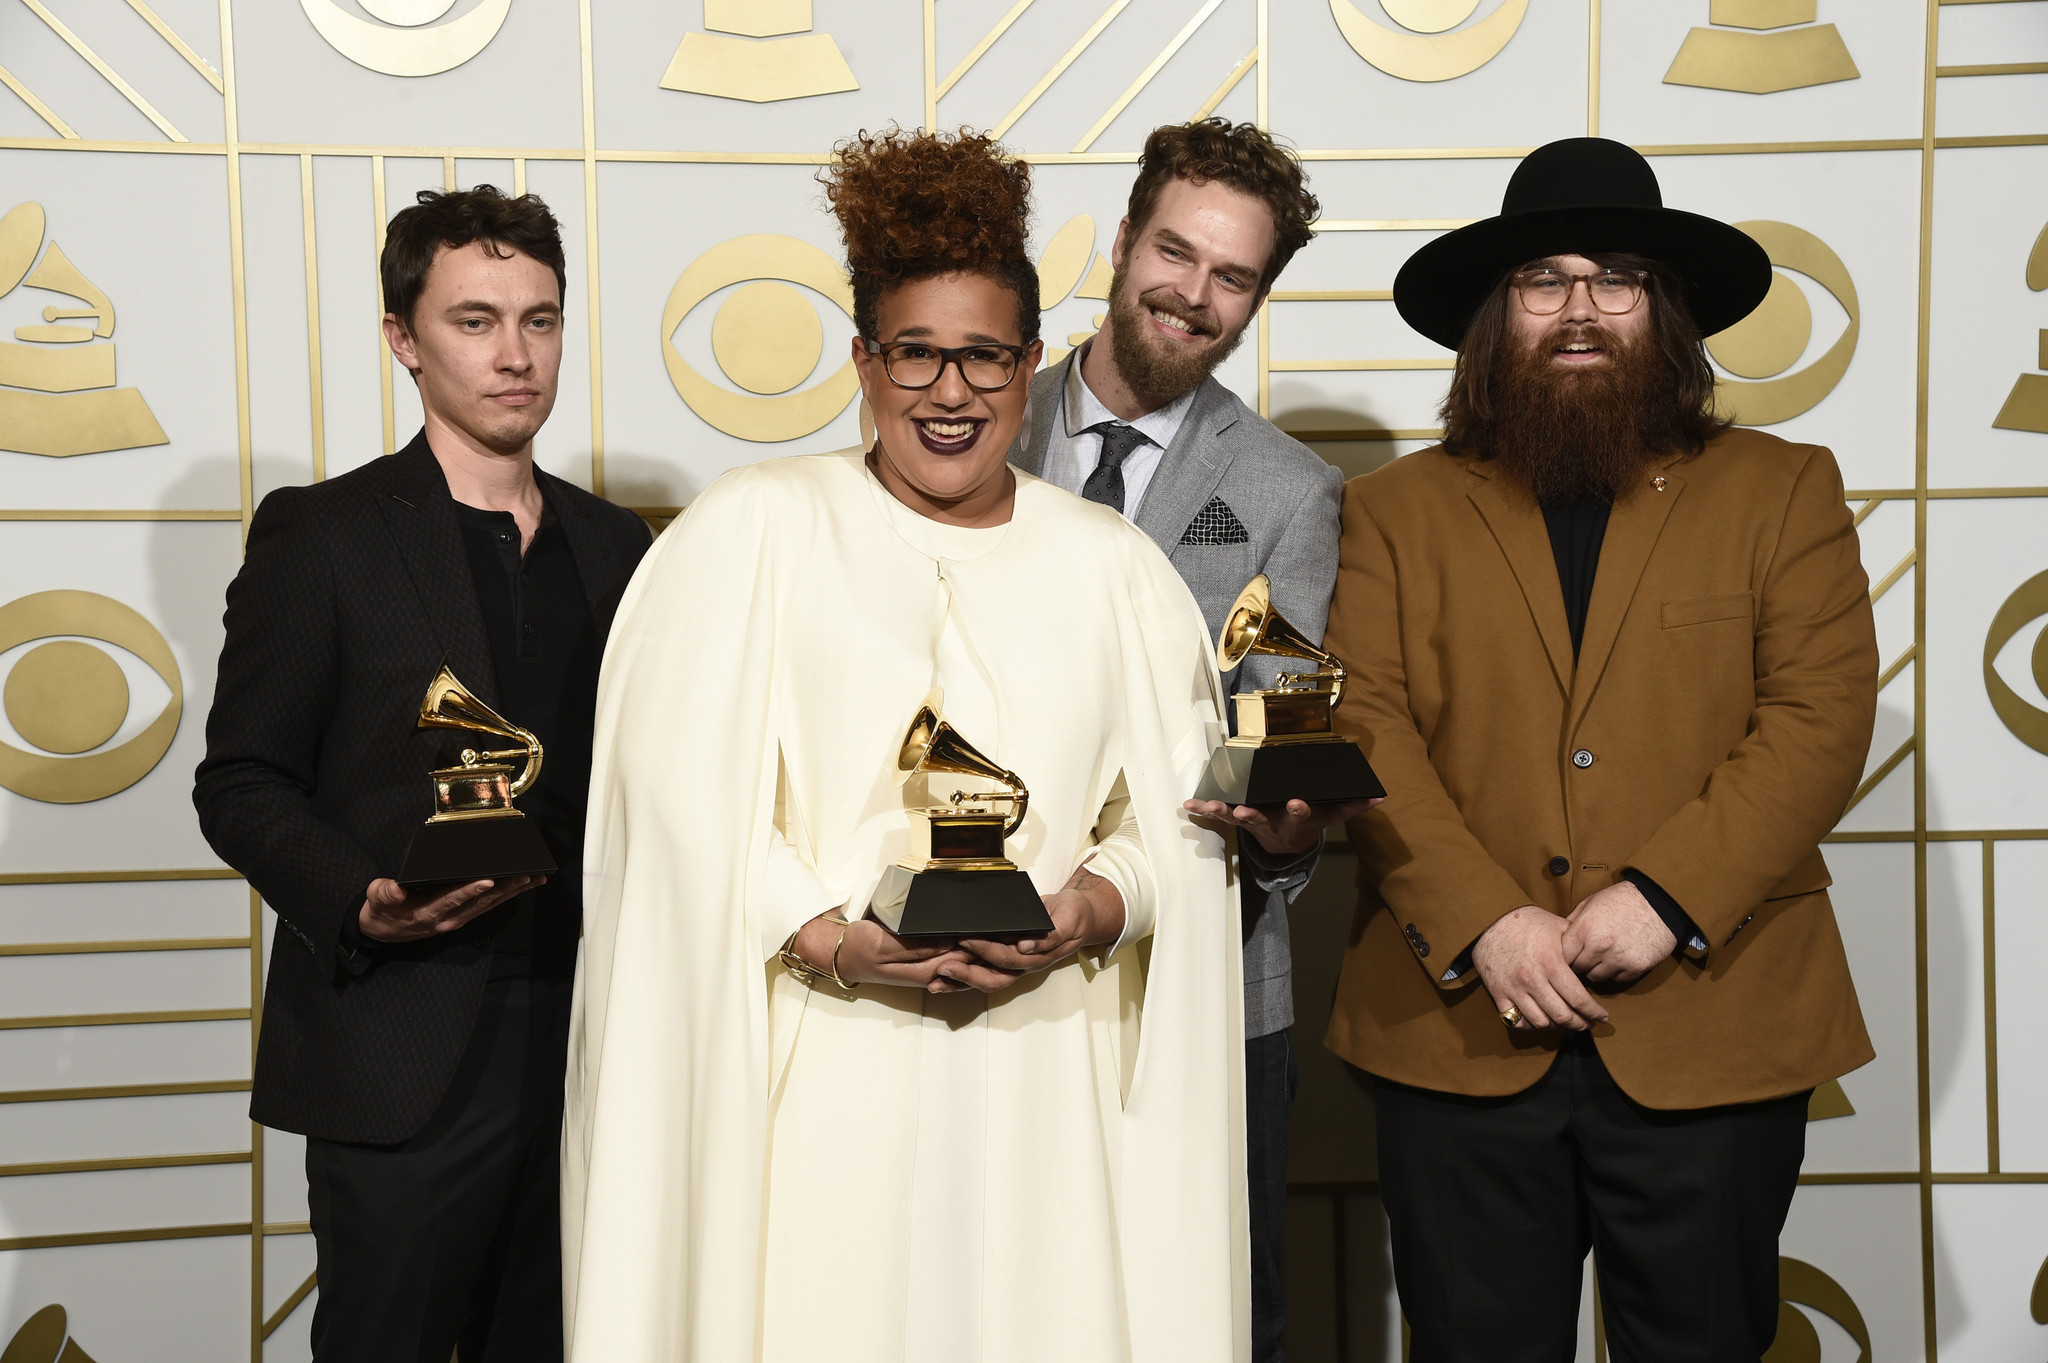 Alabama Shakes to play 2 Chicago shows in July - Chicago Tribune